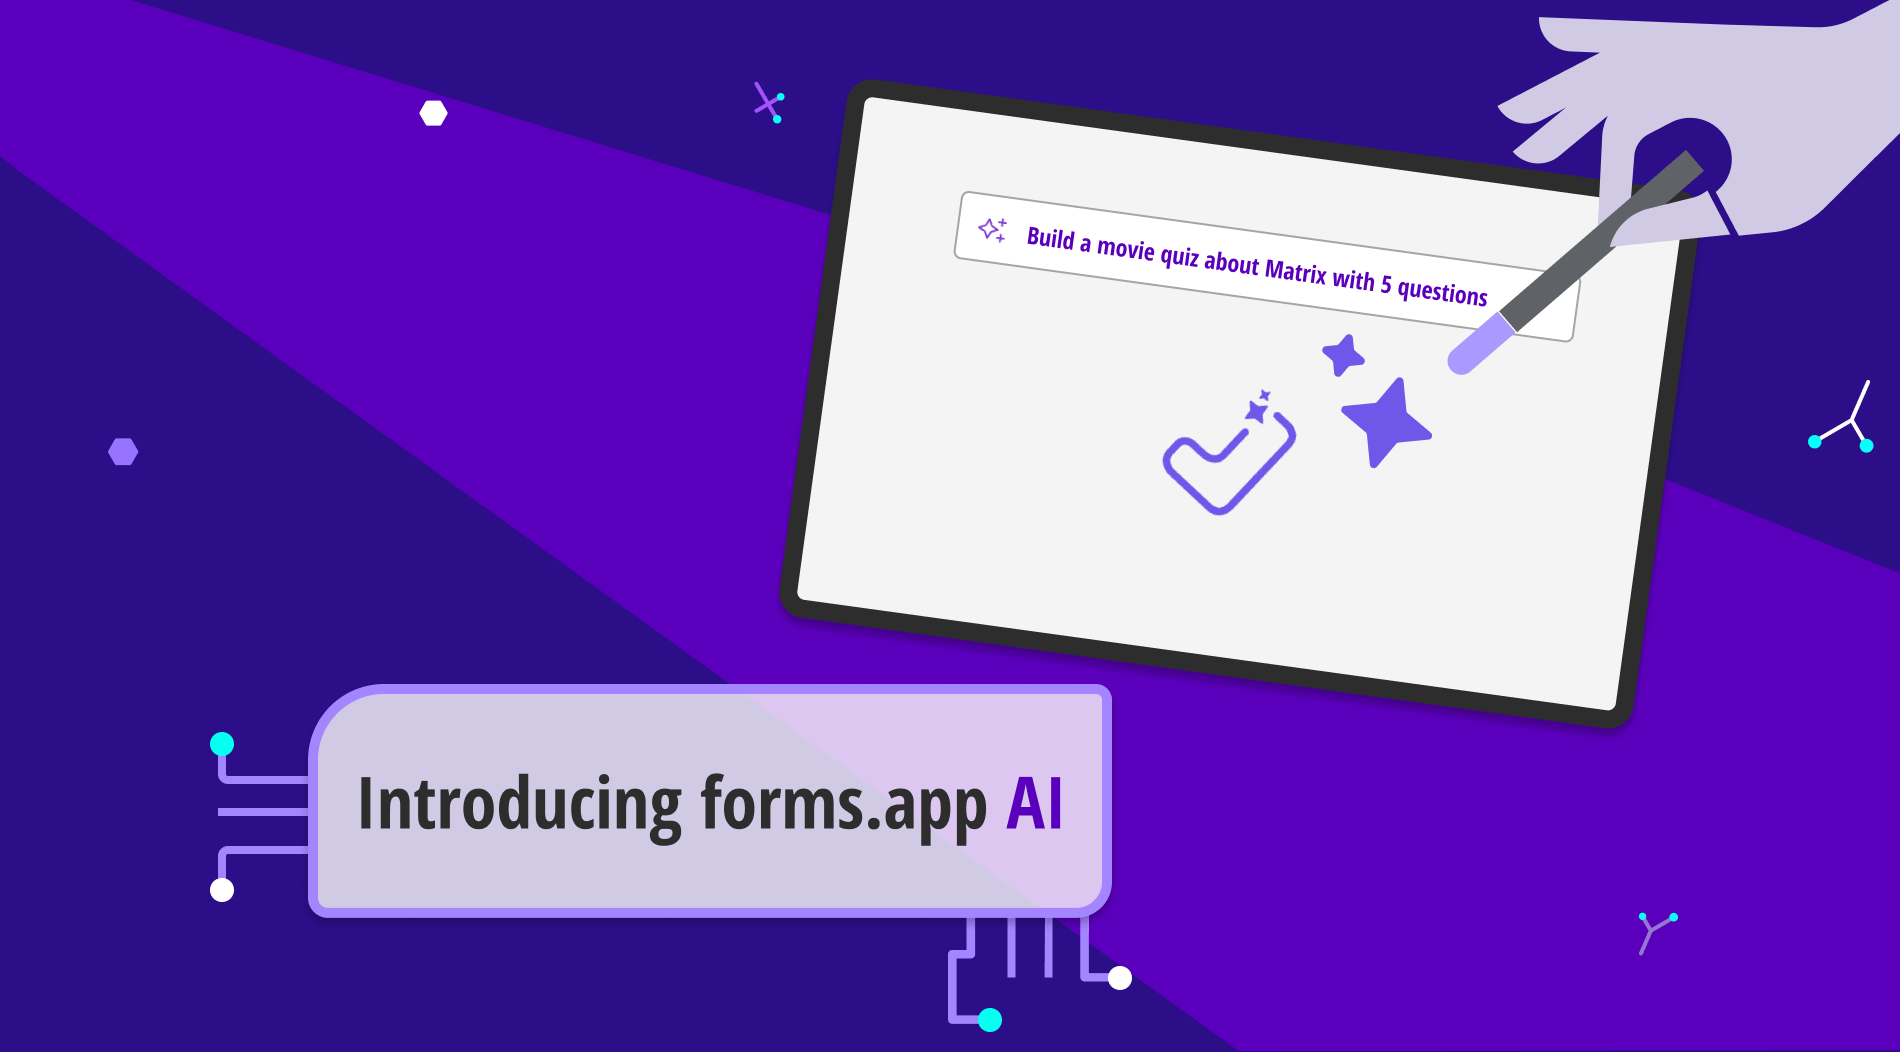 Introducing forms.app AI: The best AI form builder assistant